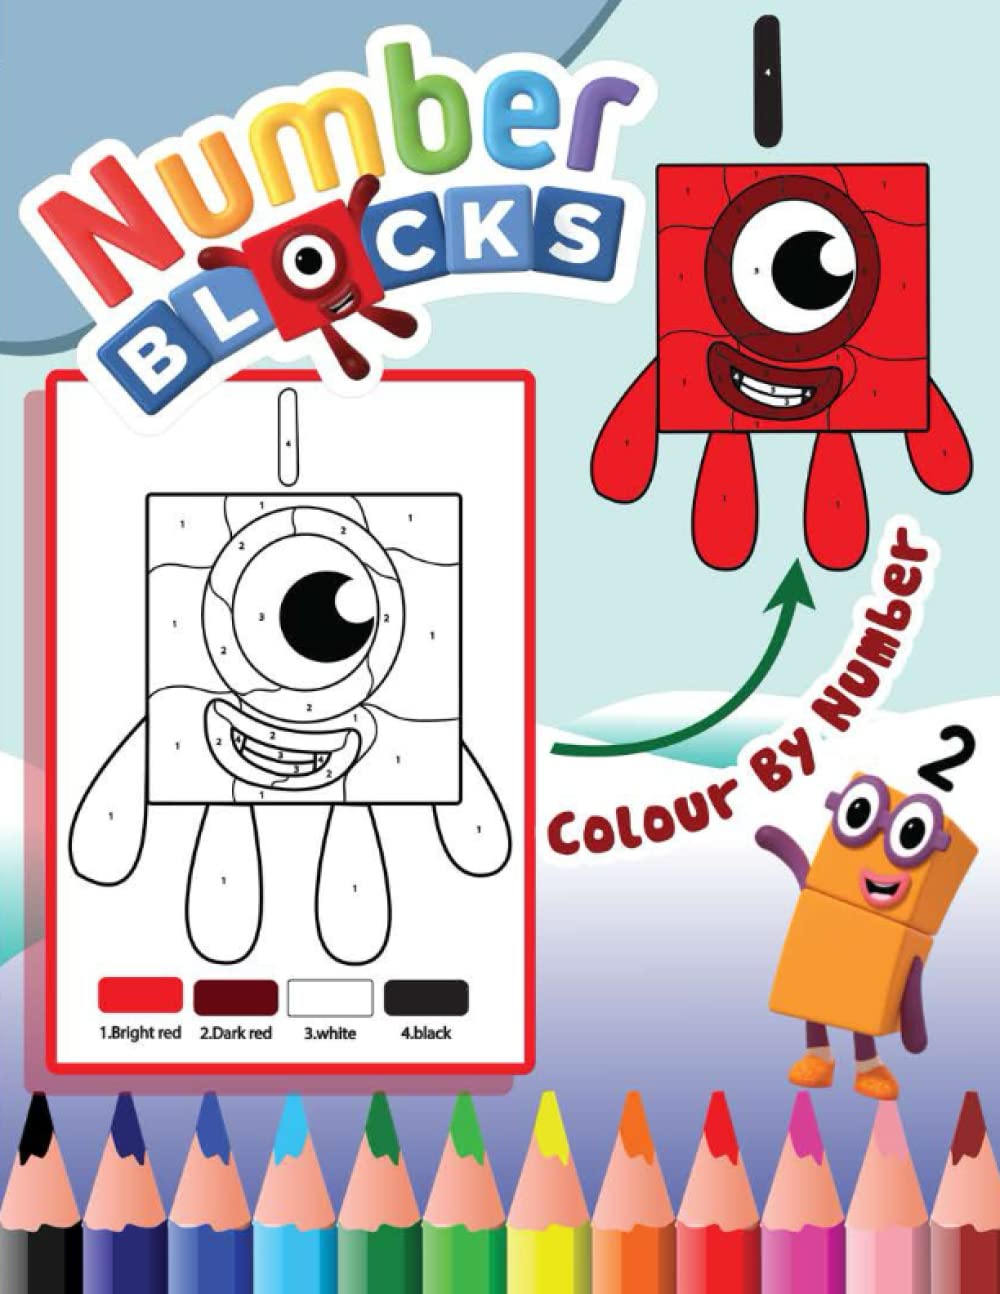 Numberblocks colour by number book coloring book for kids ages